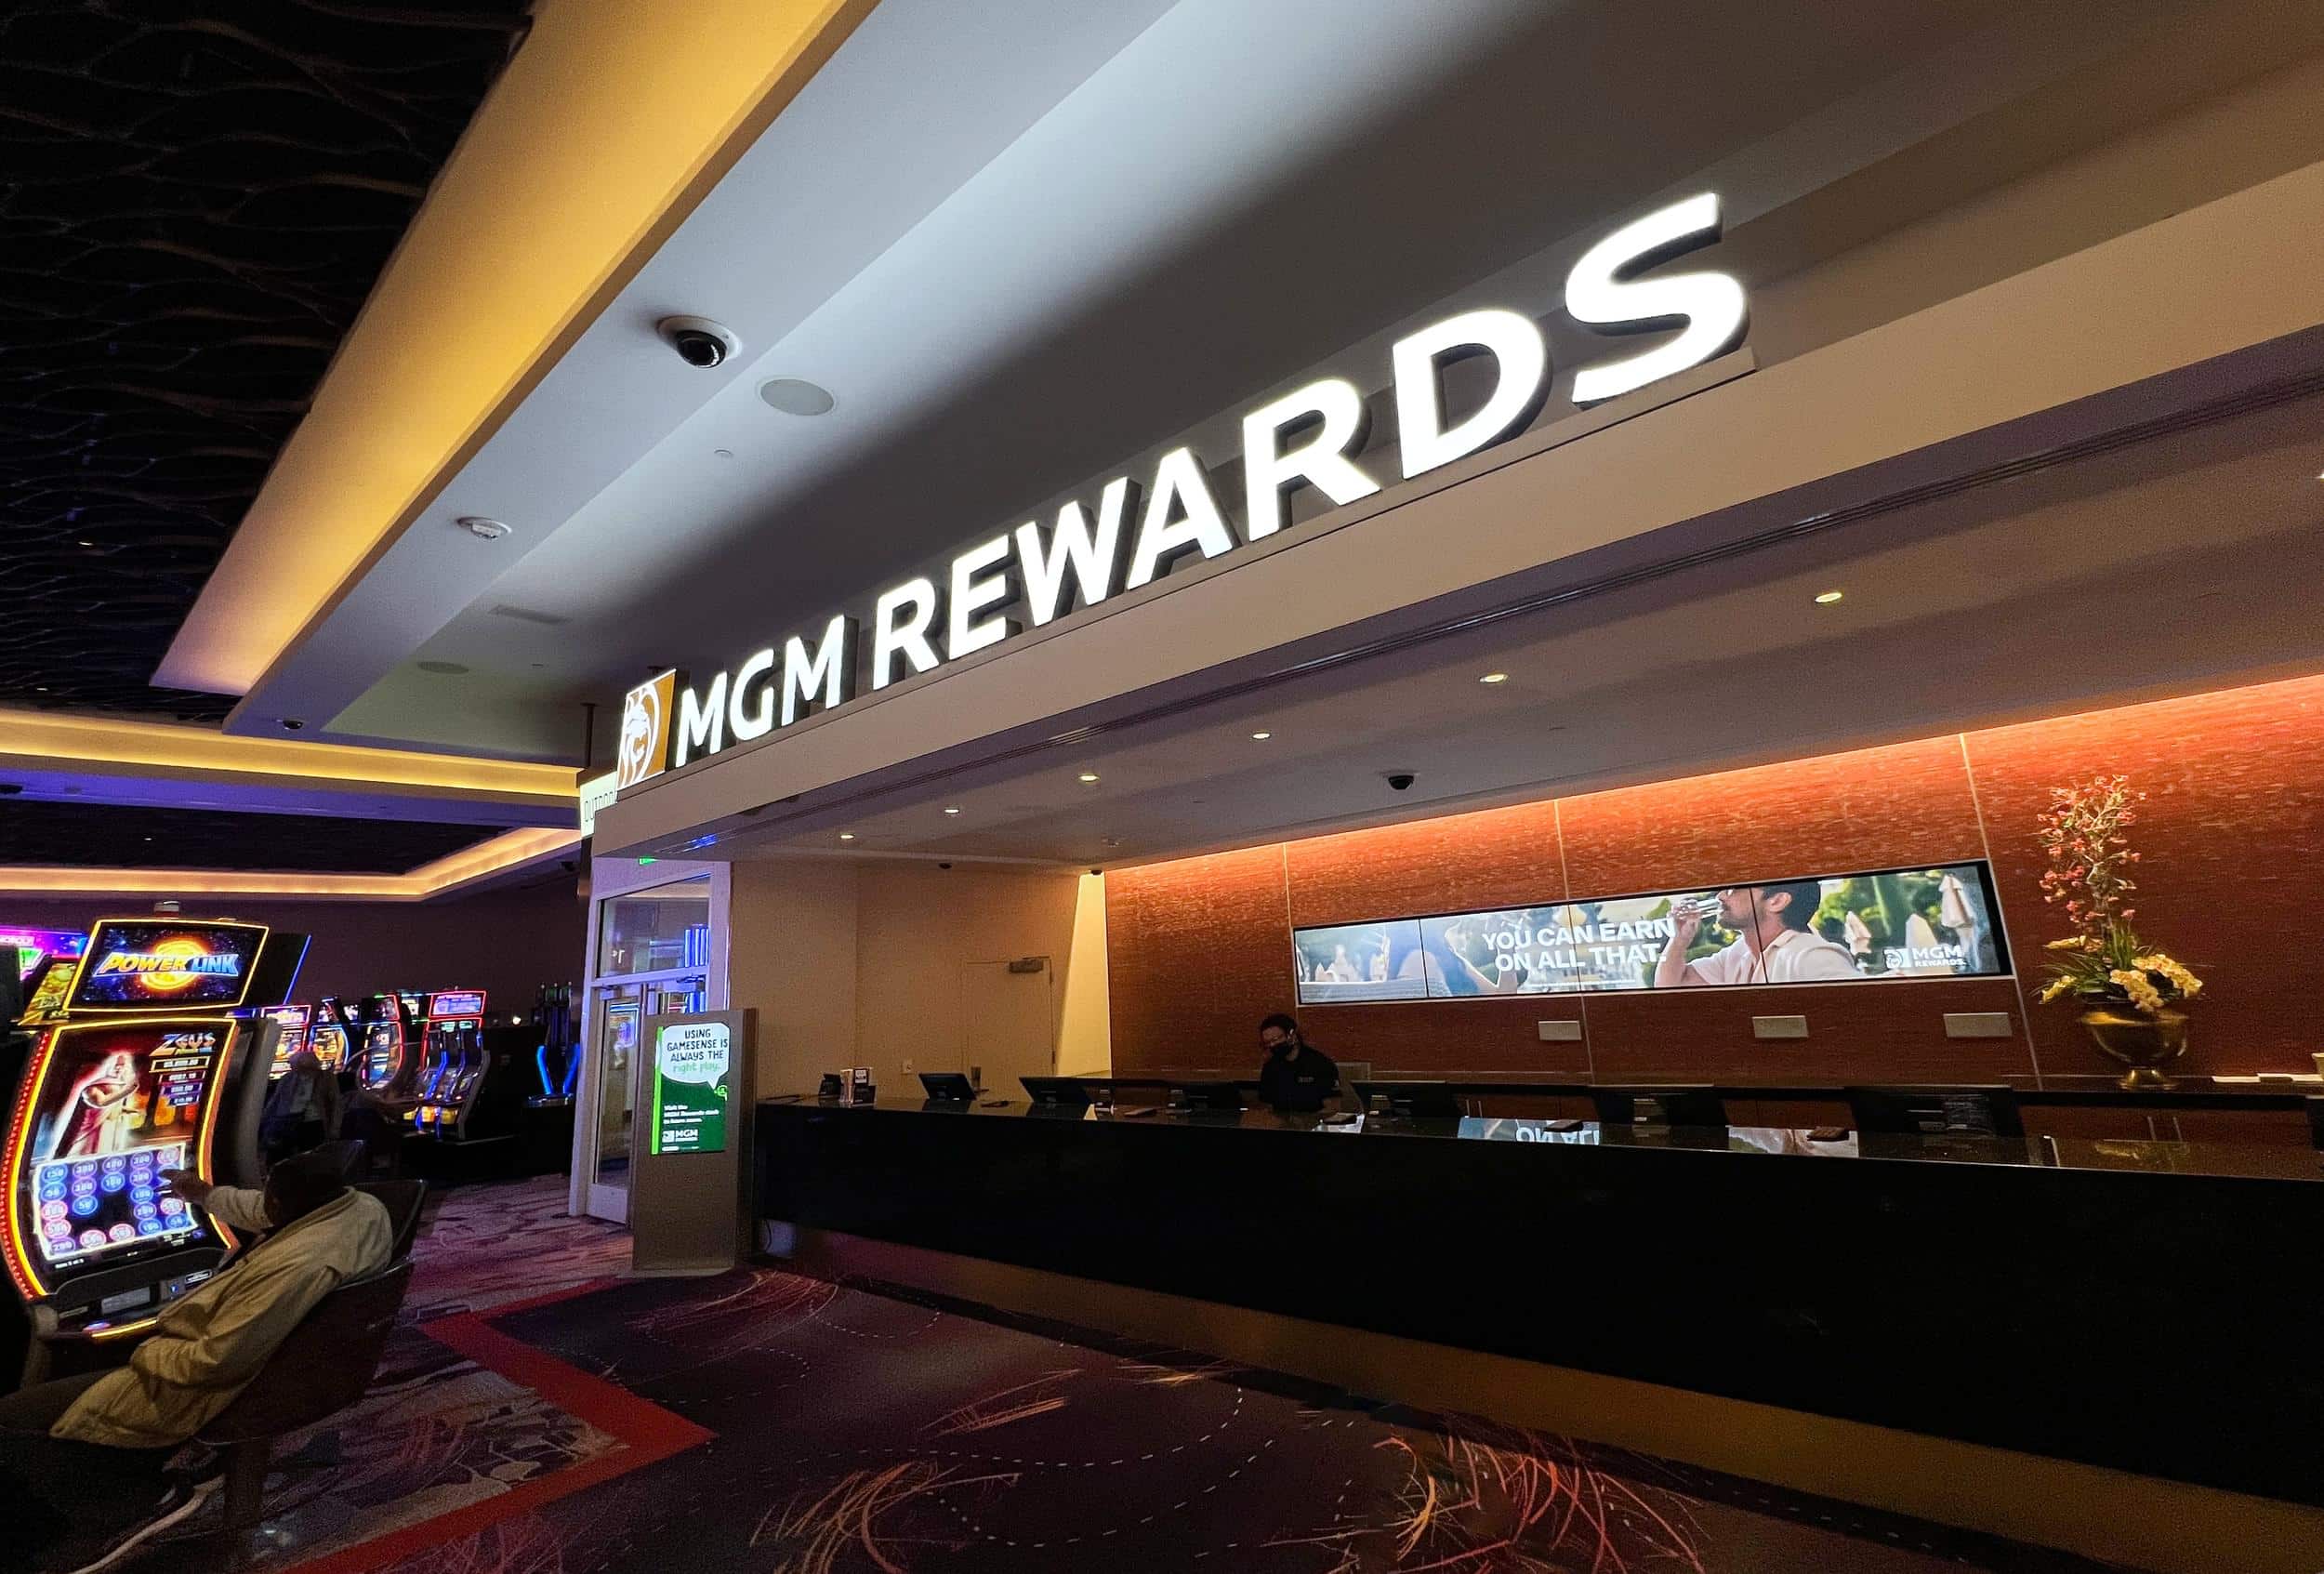 MGM Rewards Illuminated Channel Letters